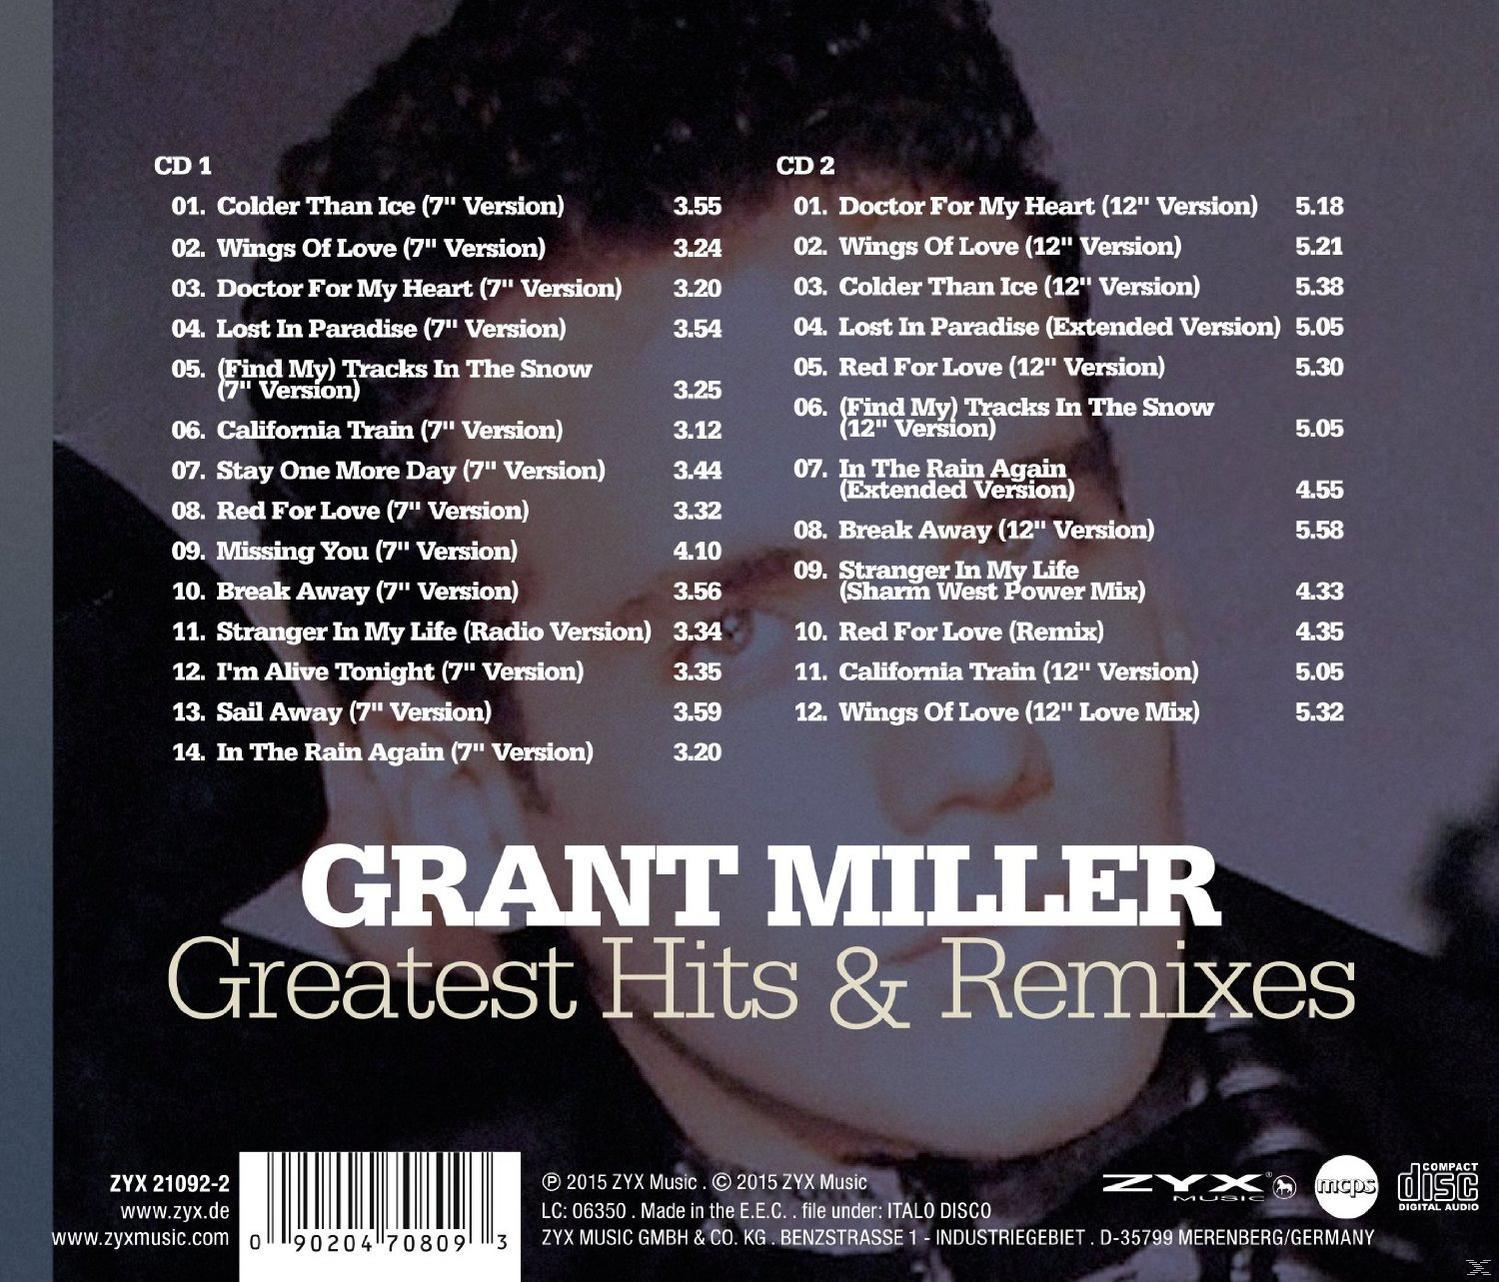 Grant Miller (CD) - Remixes Greatest - Hits 